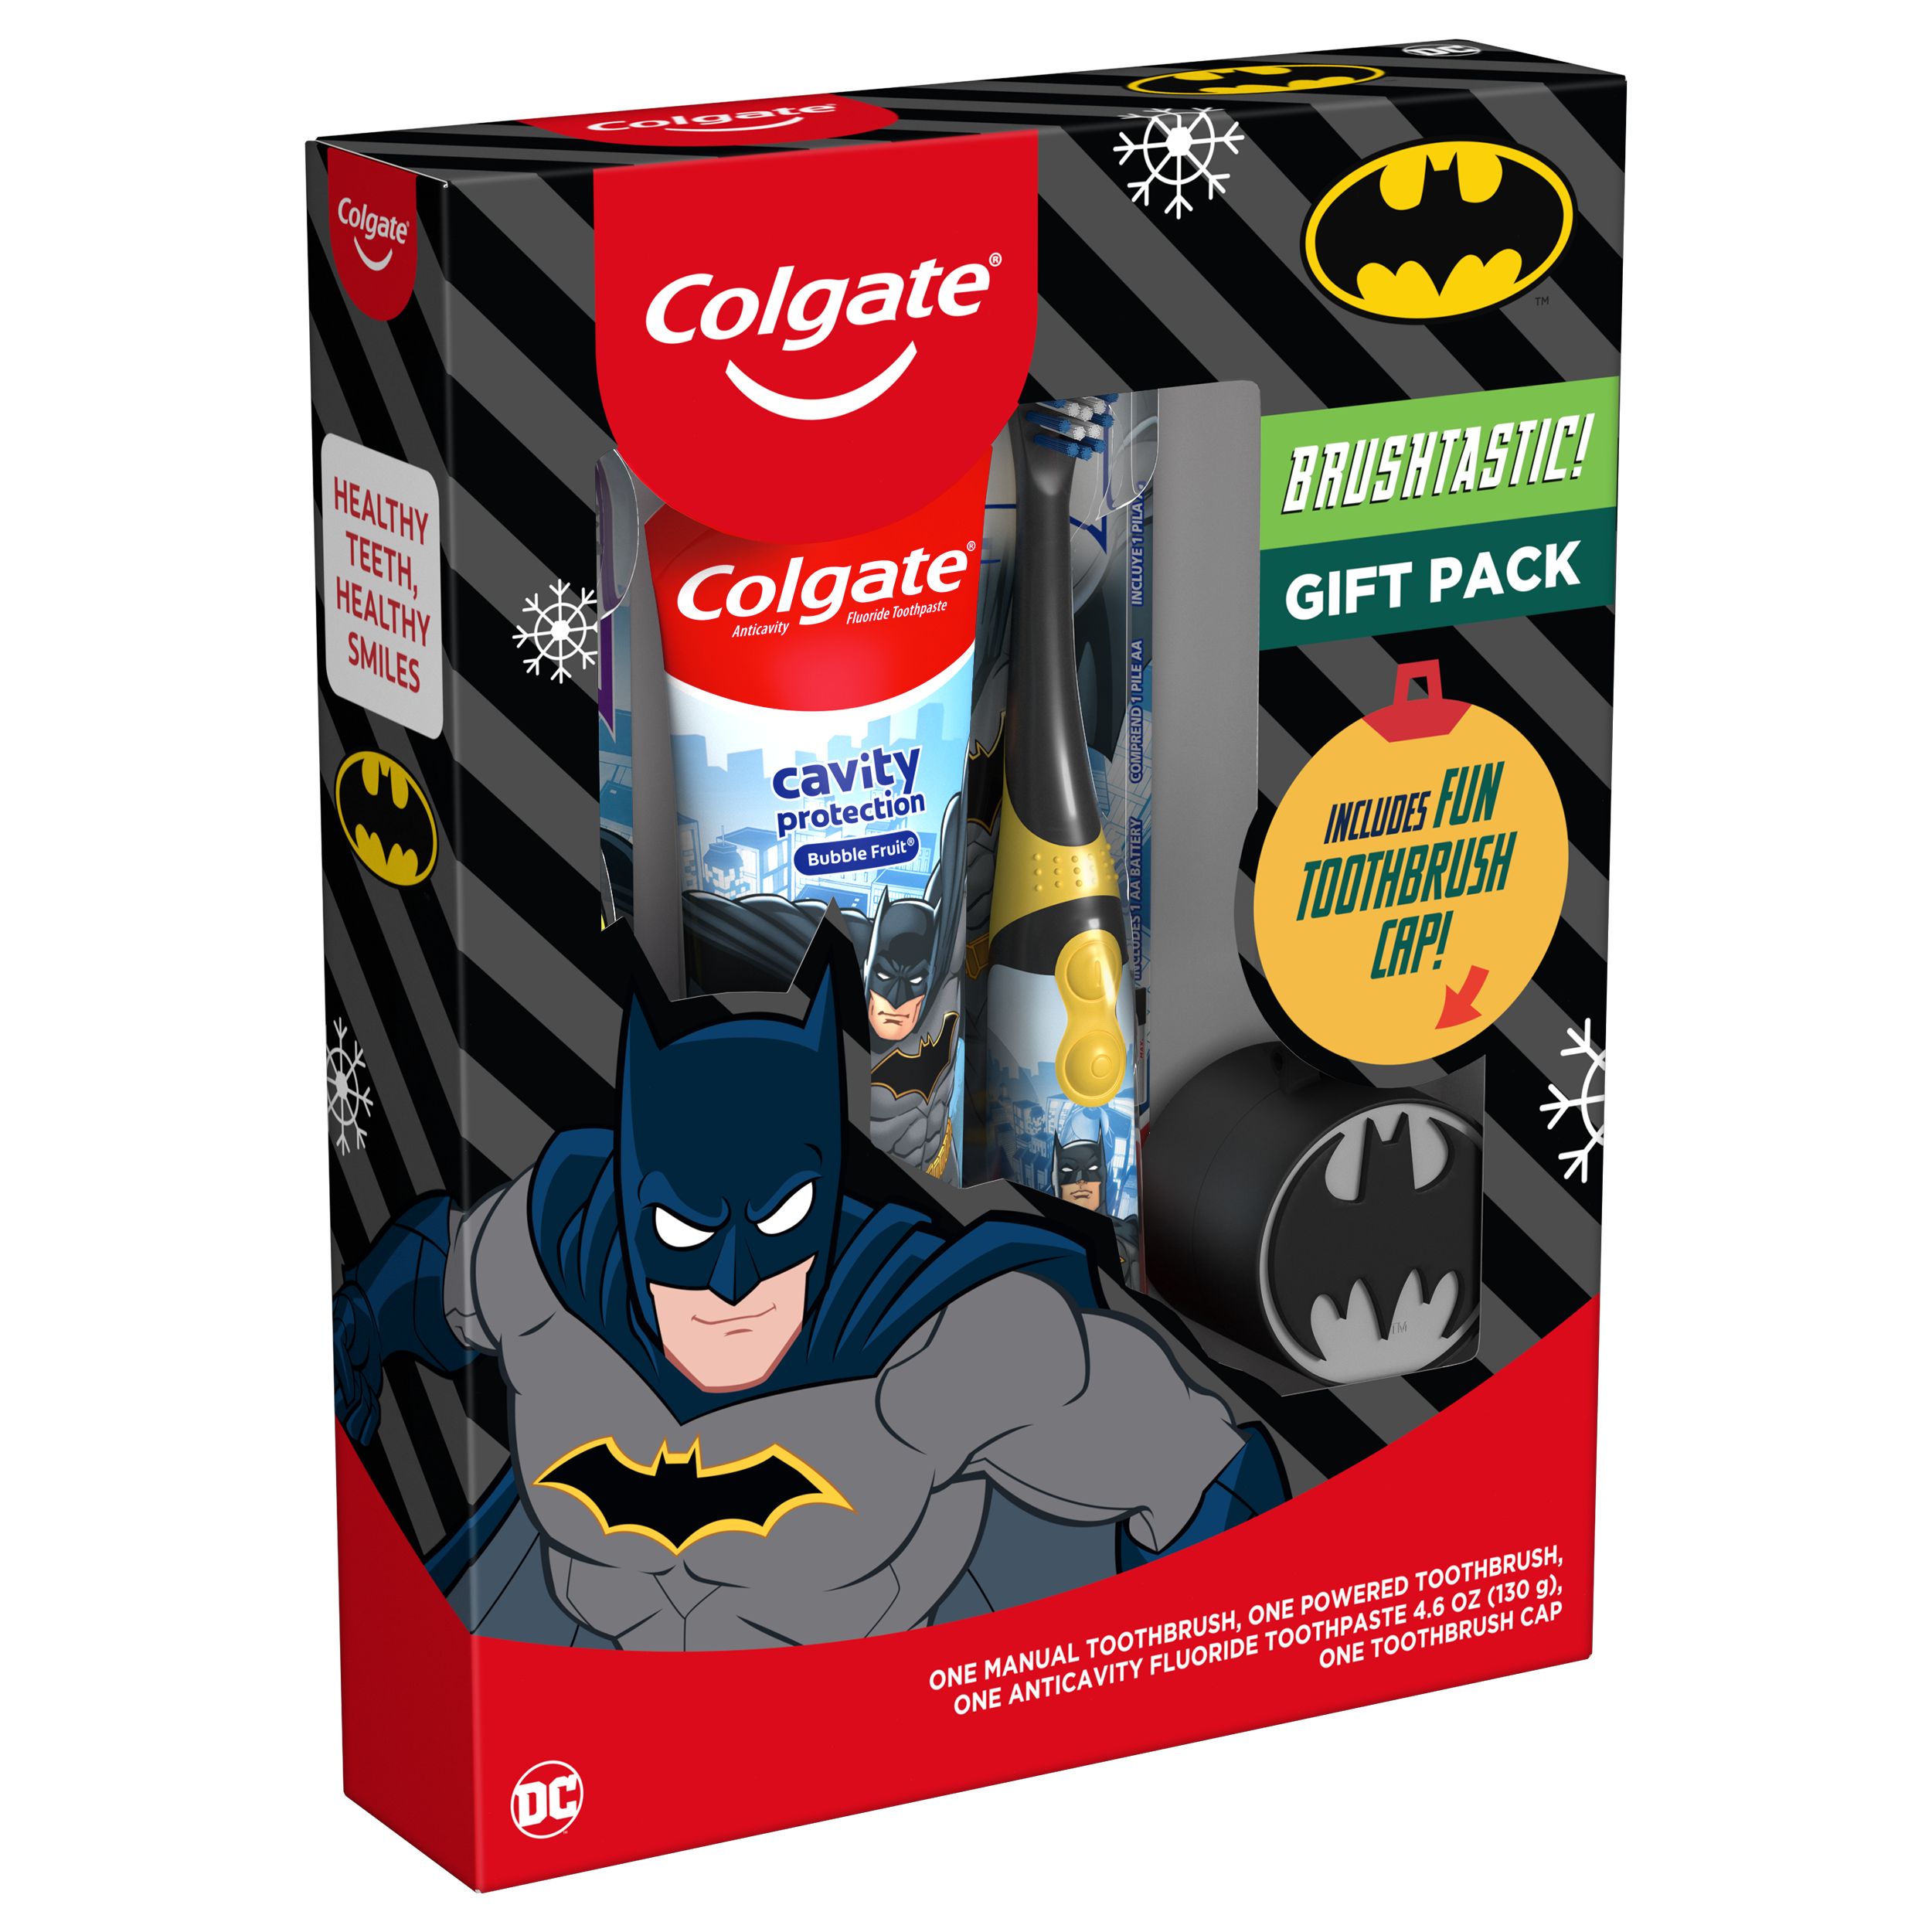 Colgate Kids Toothbrush Set with Toothpaste, Batman Gift Pack - image 2 of 5